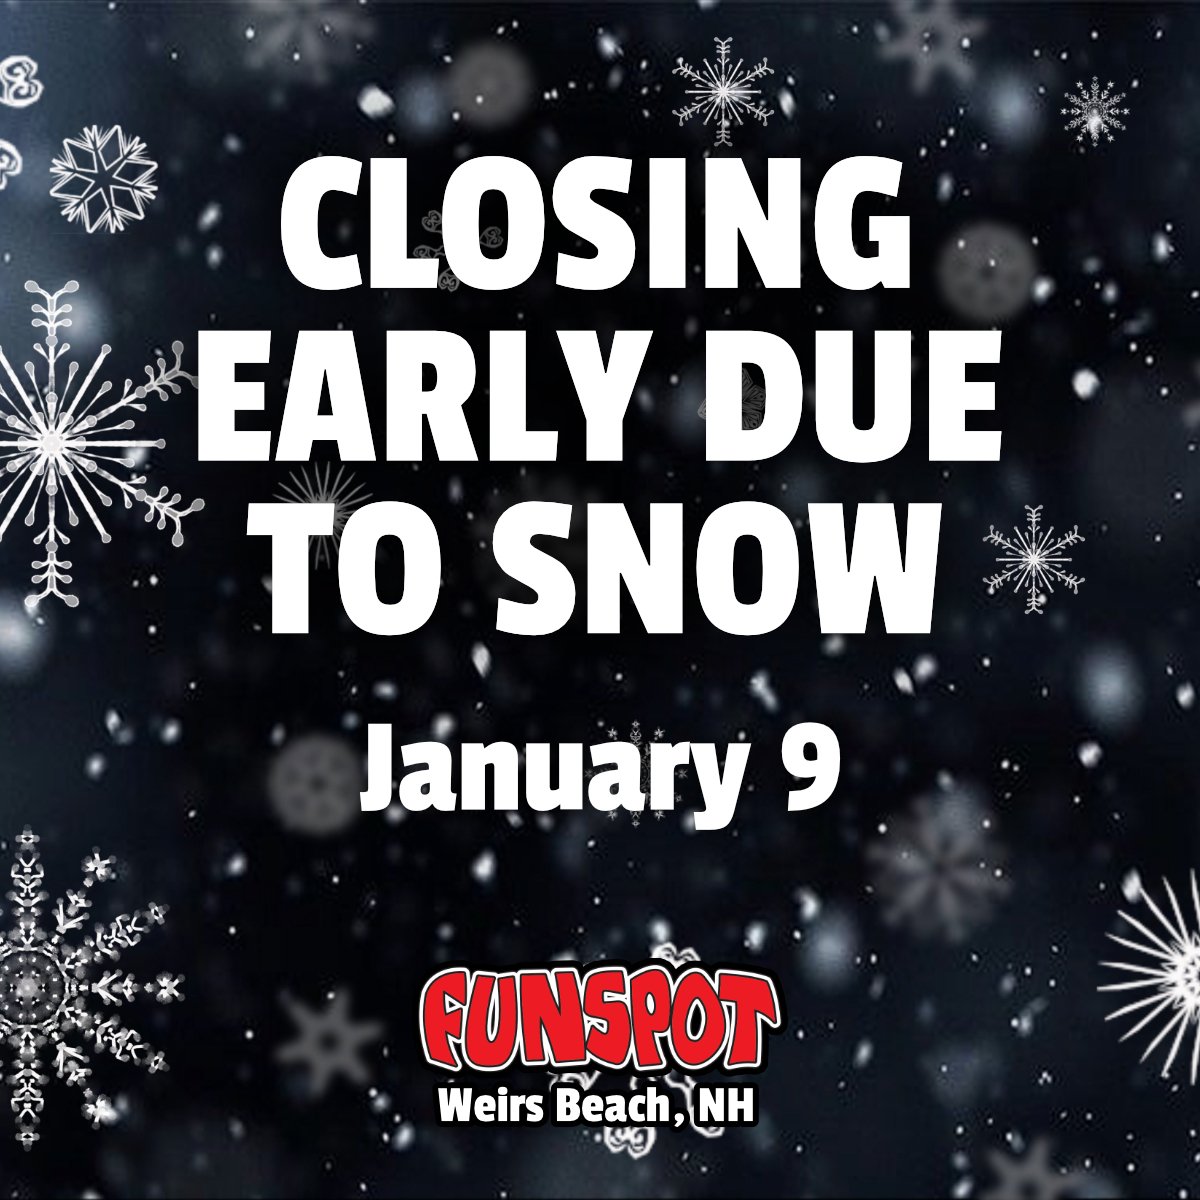 🕹️🌨️ Heads up, gamers! 🌨️ Funspot's closing early—at 5PM today (Jan 9) due to the incoming winter weather. Take it slow on the roads, and enjoy a cozy evening at home. See you for more gaming adventures when the storm blows over! ❄️  #FunspotNH #GameSafe